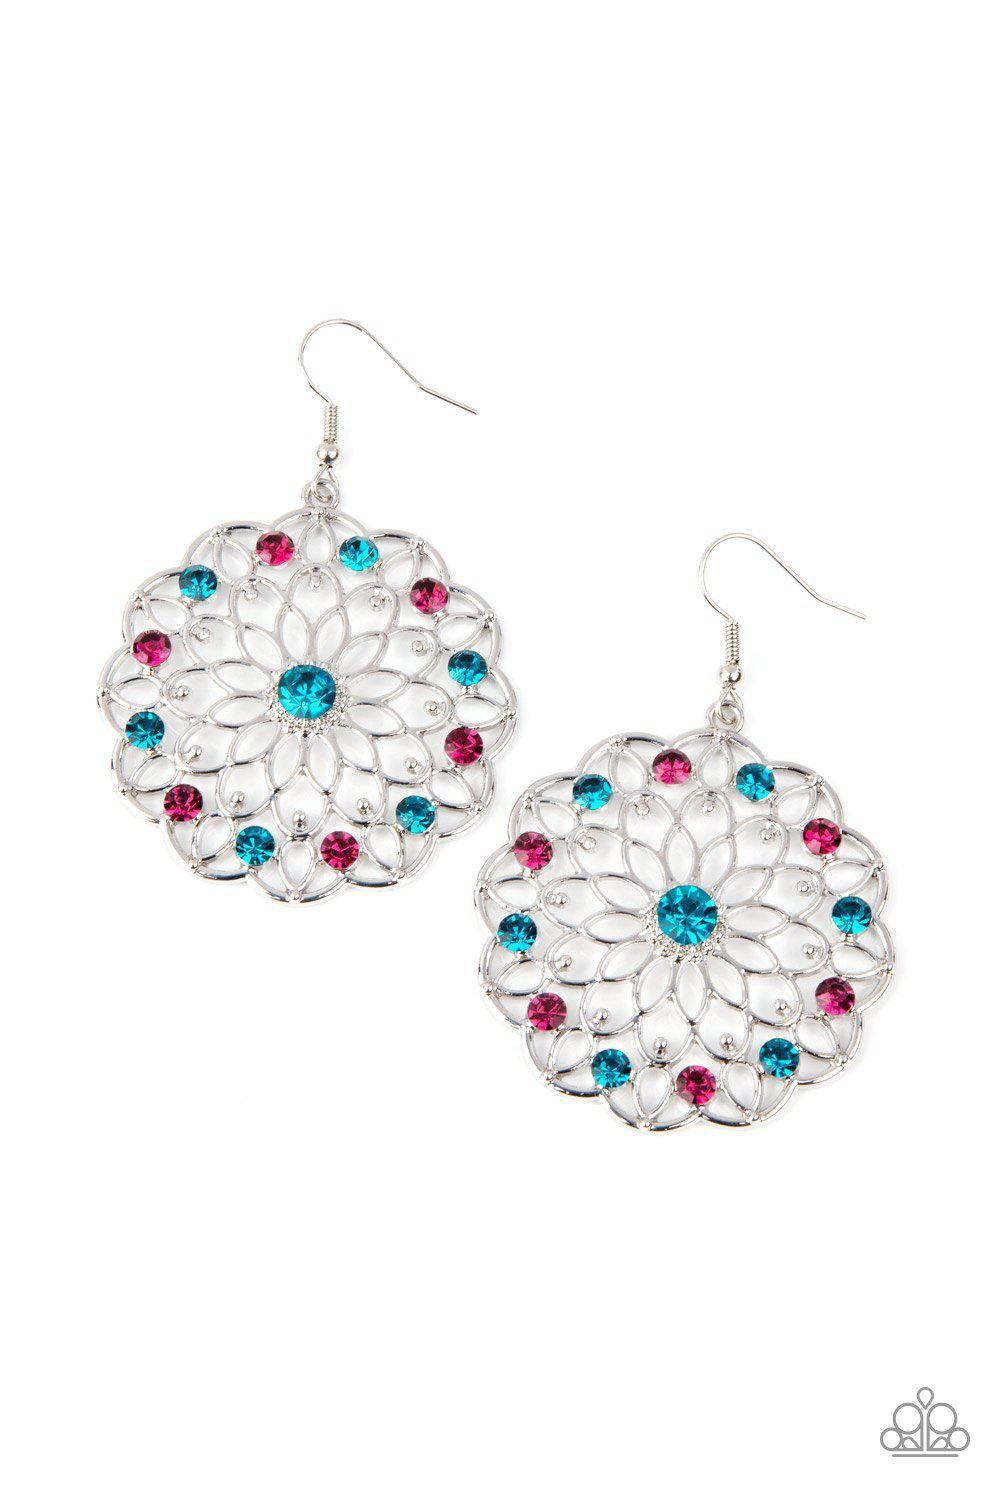 Posy Proposal Multi Blue and Pink Rhinestone Flower Earrings - Paparazzi Accessories - lightbox -CarasShop.com - $5 Jewelry by Cara Jewels